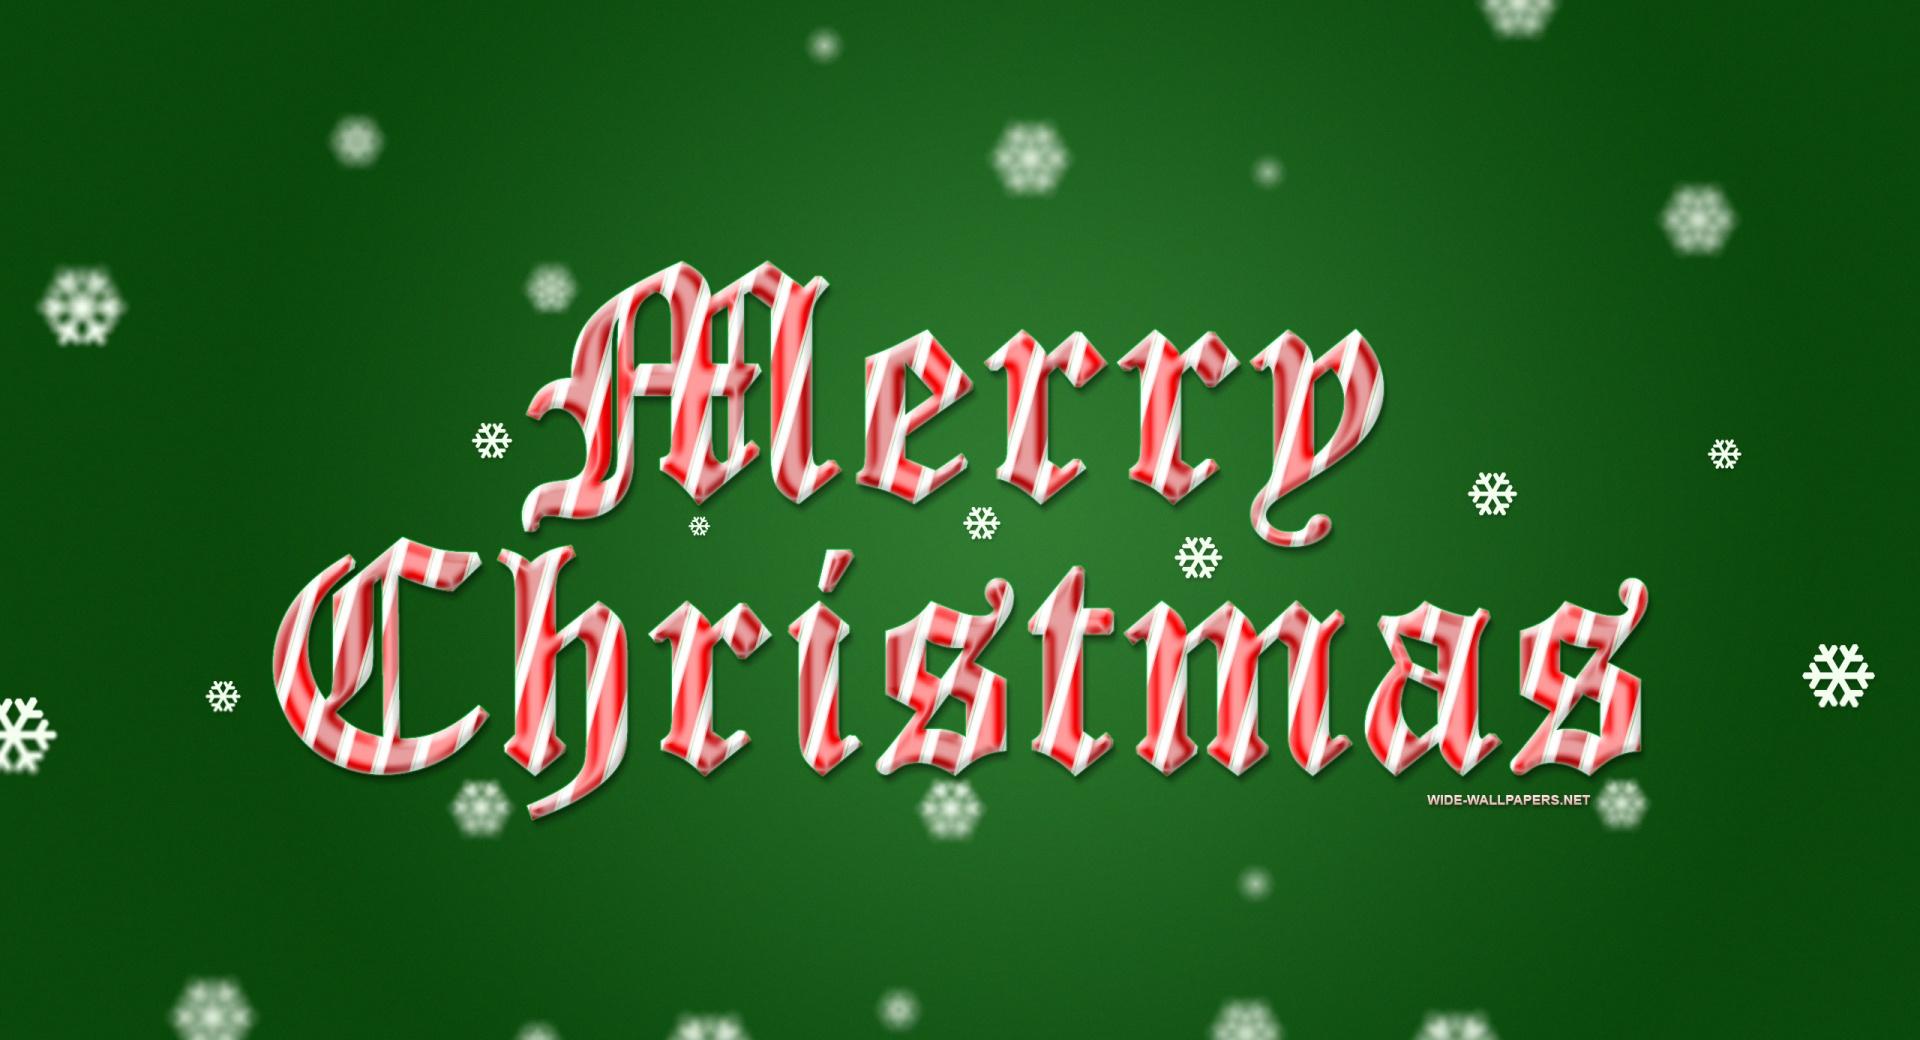 Merry Christmas 2016 Green Background wallpapers HD quality